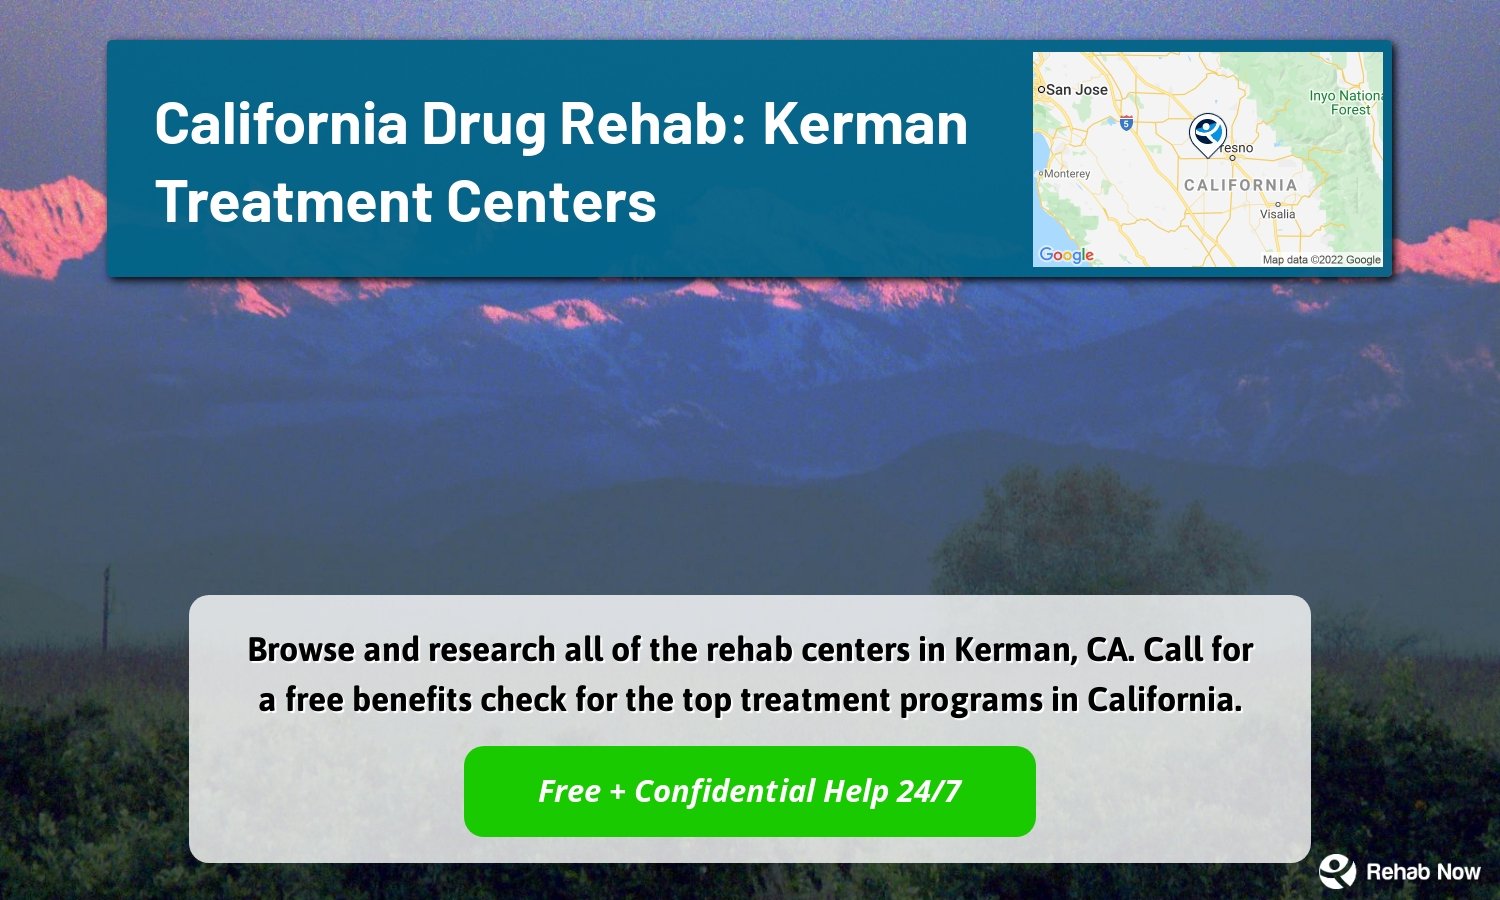 Browse and research all of the rehab centers in Kerman, CA. Call for a free benefits check for the top treatment programs in California.